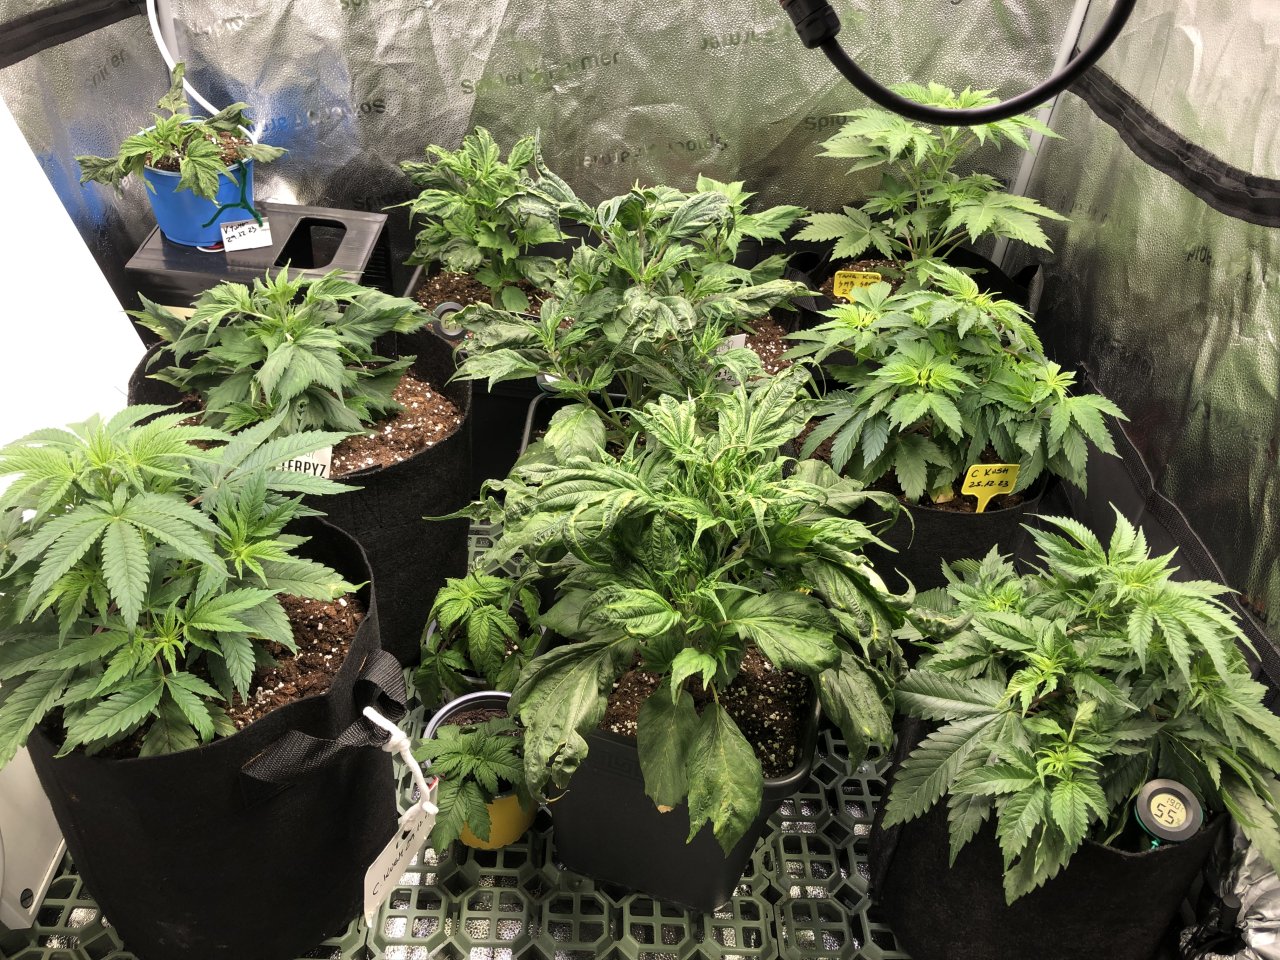 Overview - day 37 since seeded - Kush and Mutations